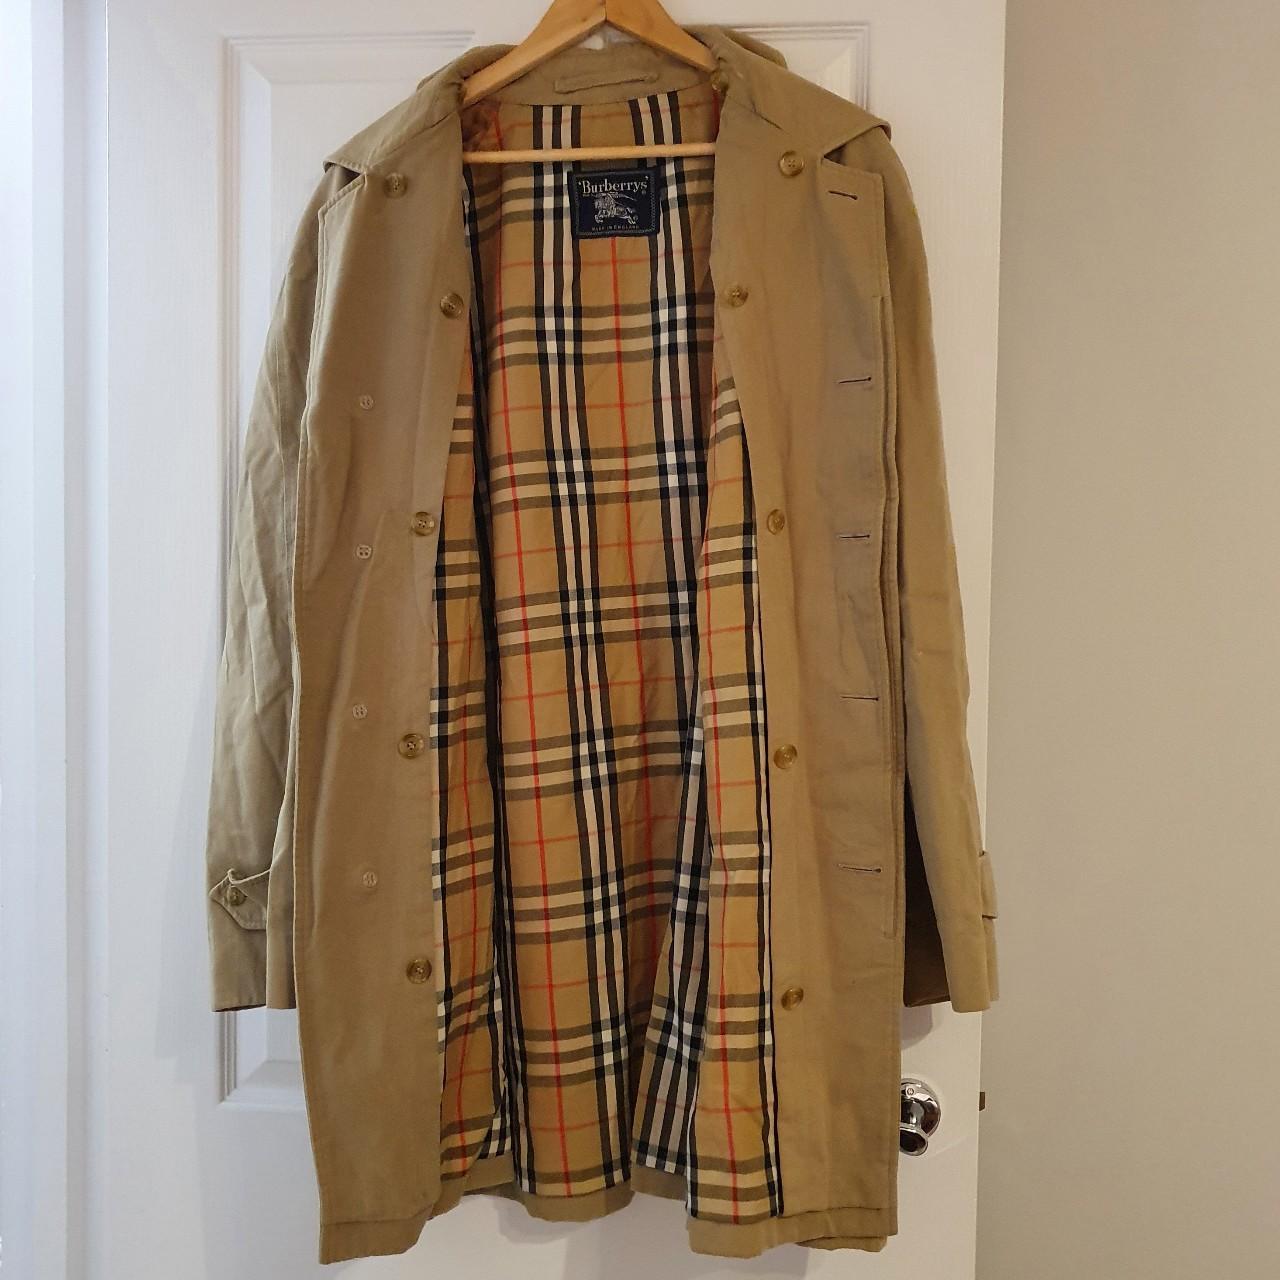 Burberry vintage beige trench coat with classic... - Depop